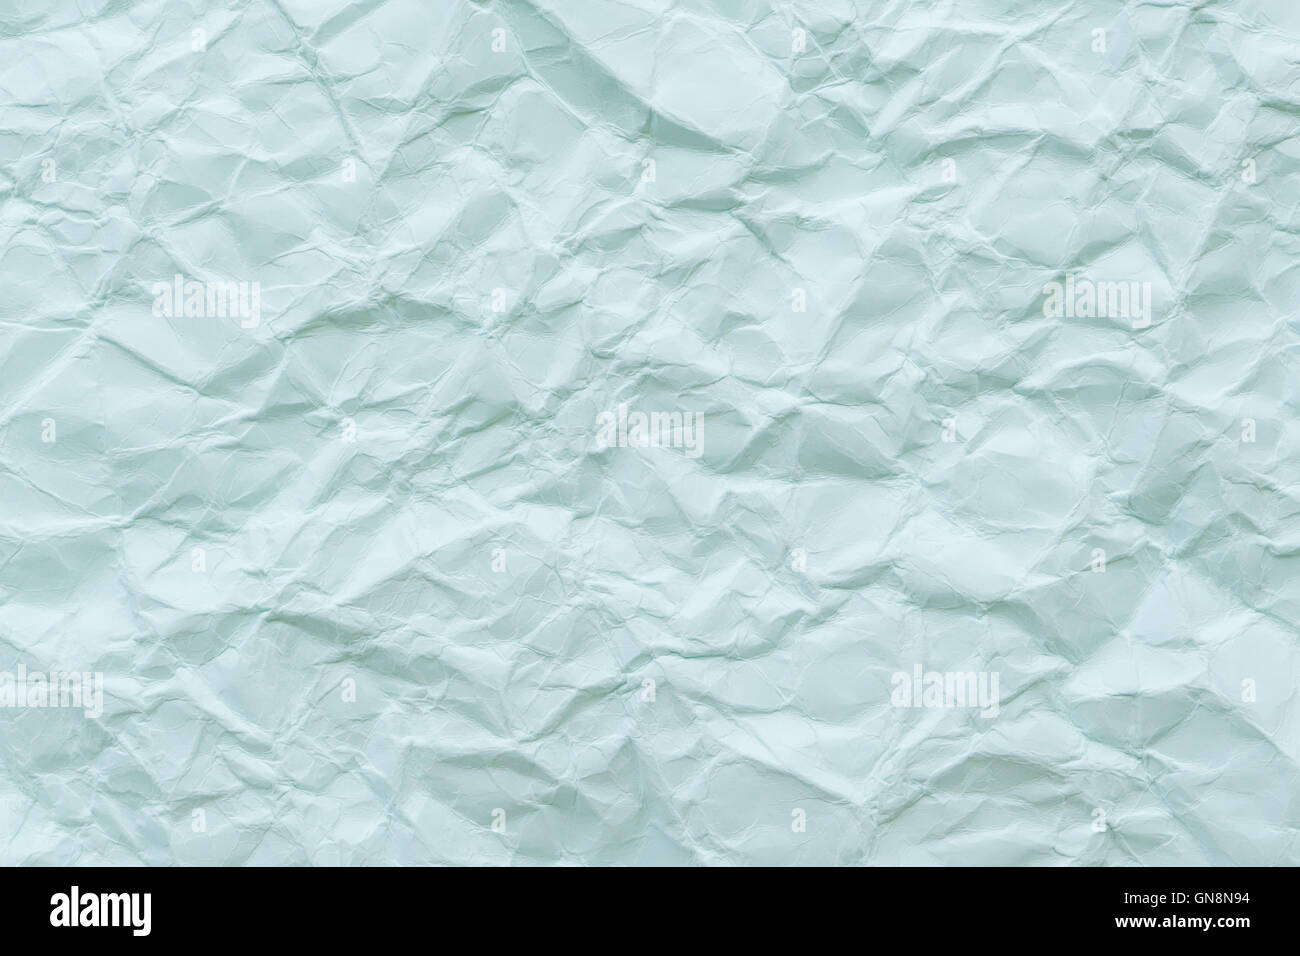 Rough Light Blue Paper Texture Stock Photo, Picture and Royalty Free Image.  Image 96224491.